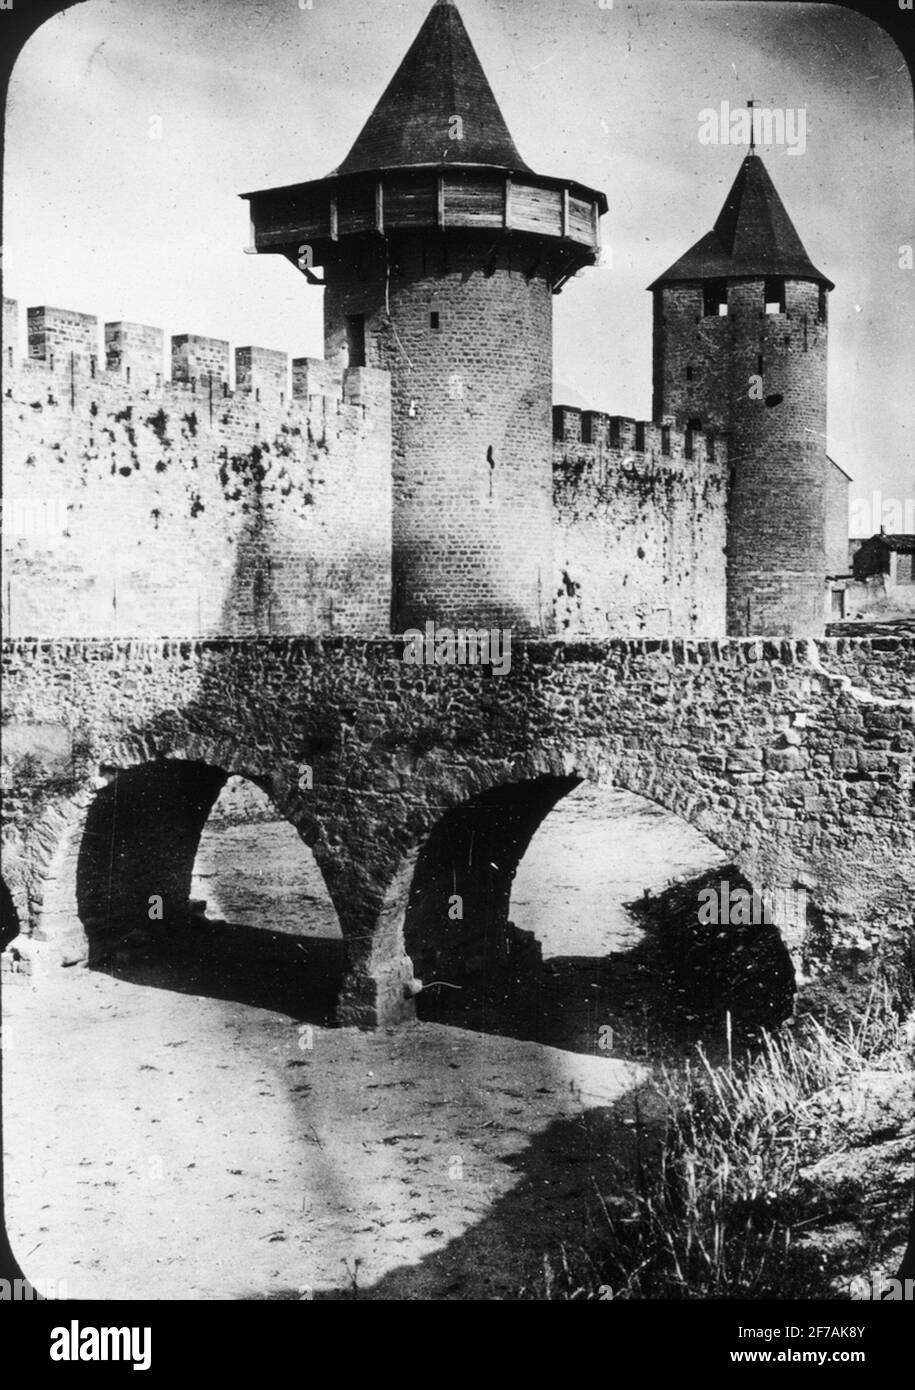 SkiopT icon with motifs of medieval defense tower Cité de Carcassonne.The image has been stored in cardboard labeled: Höstesan 1907. Carcassonne.8. NO: 13. Stock Photo